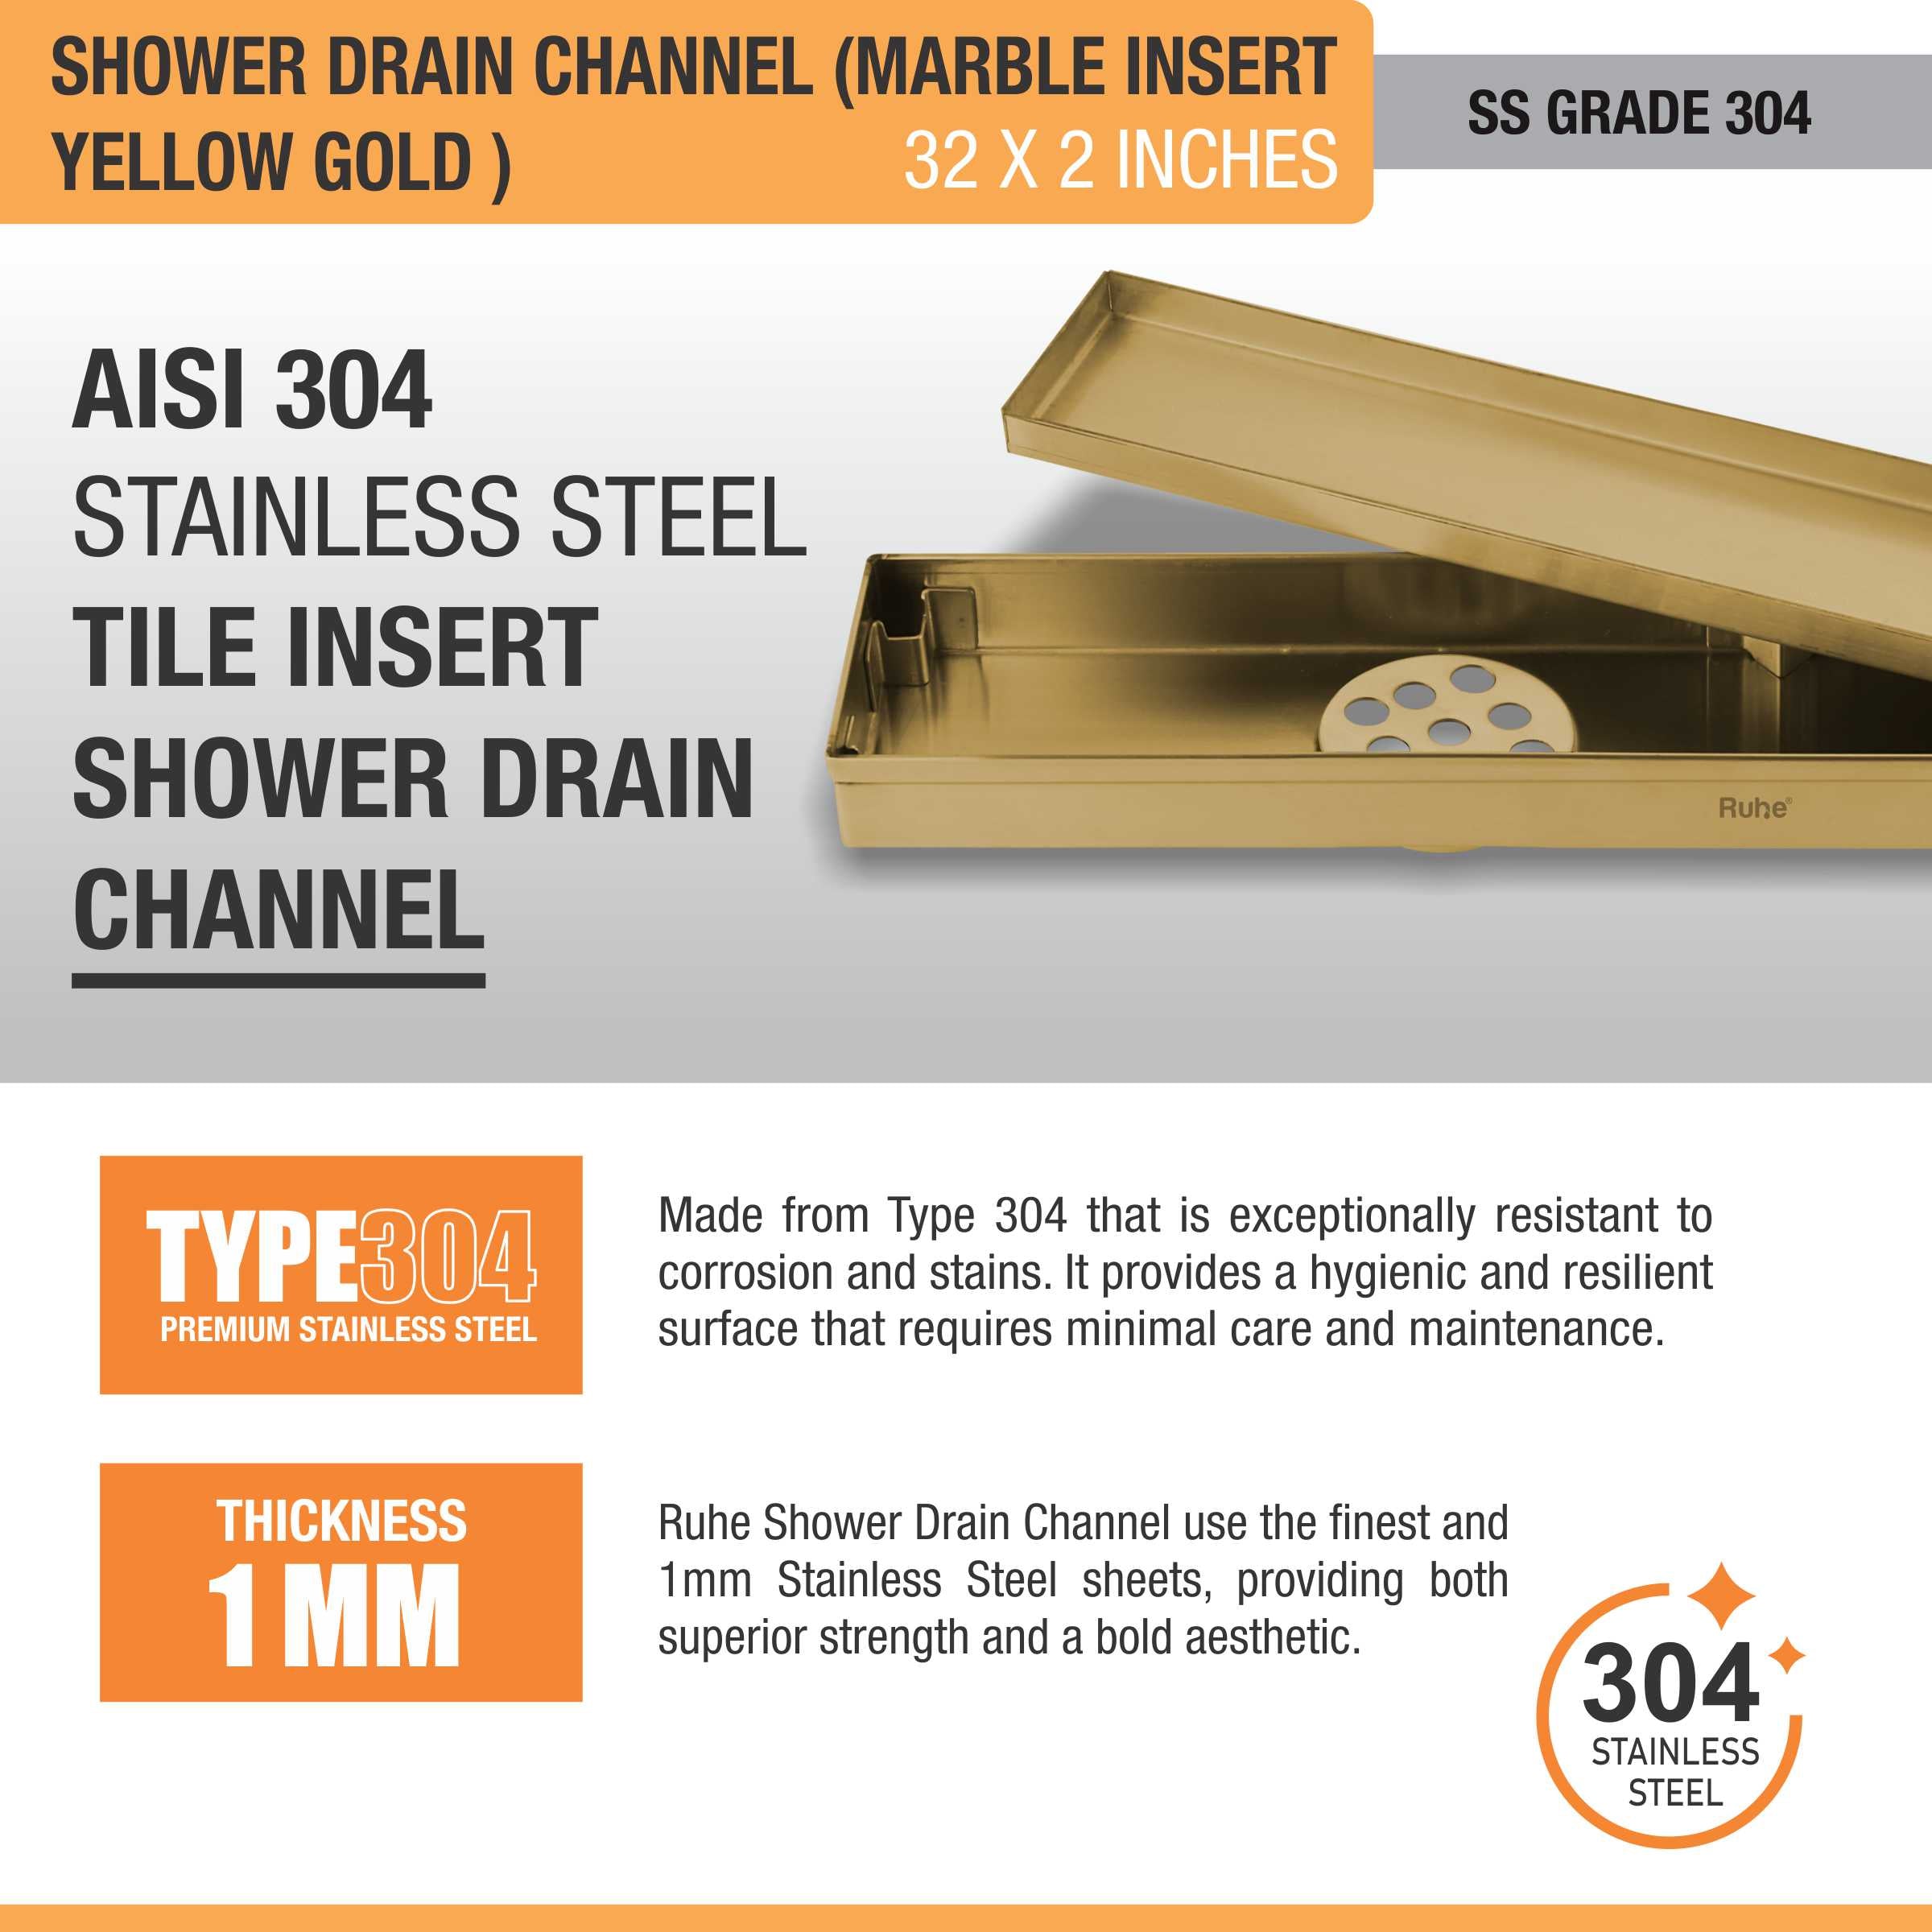 Marble Insert Shower Drain Channel (32 x 2 Inches) YELLOW GOLD stainless steel